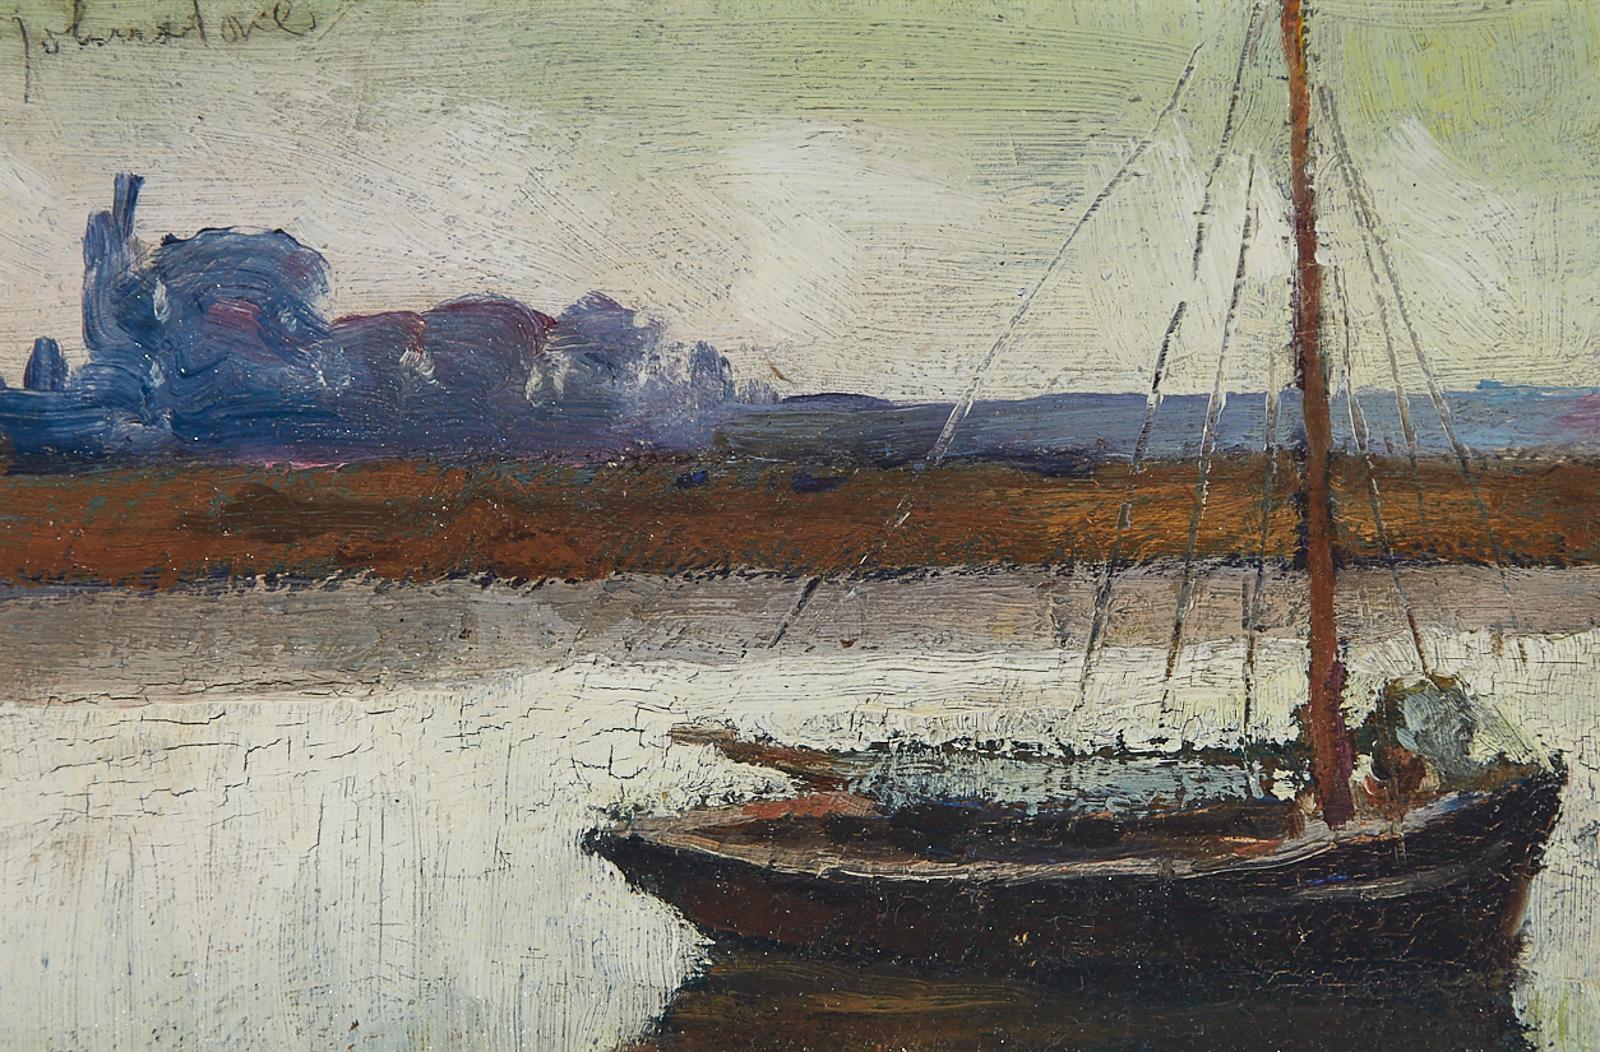 John Young Johnstone (1887-1930) - Boat At Rest